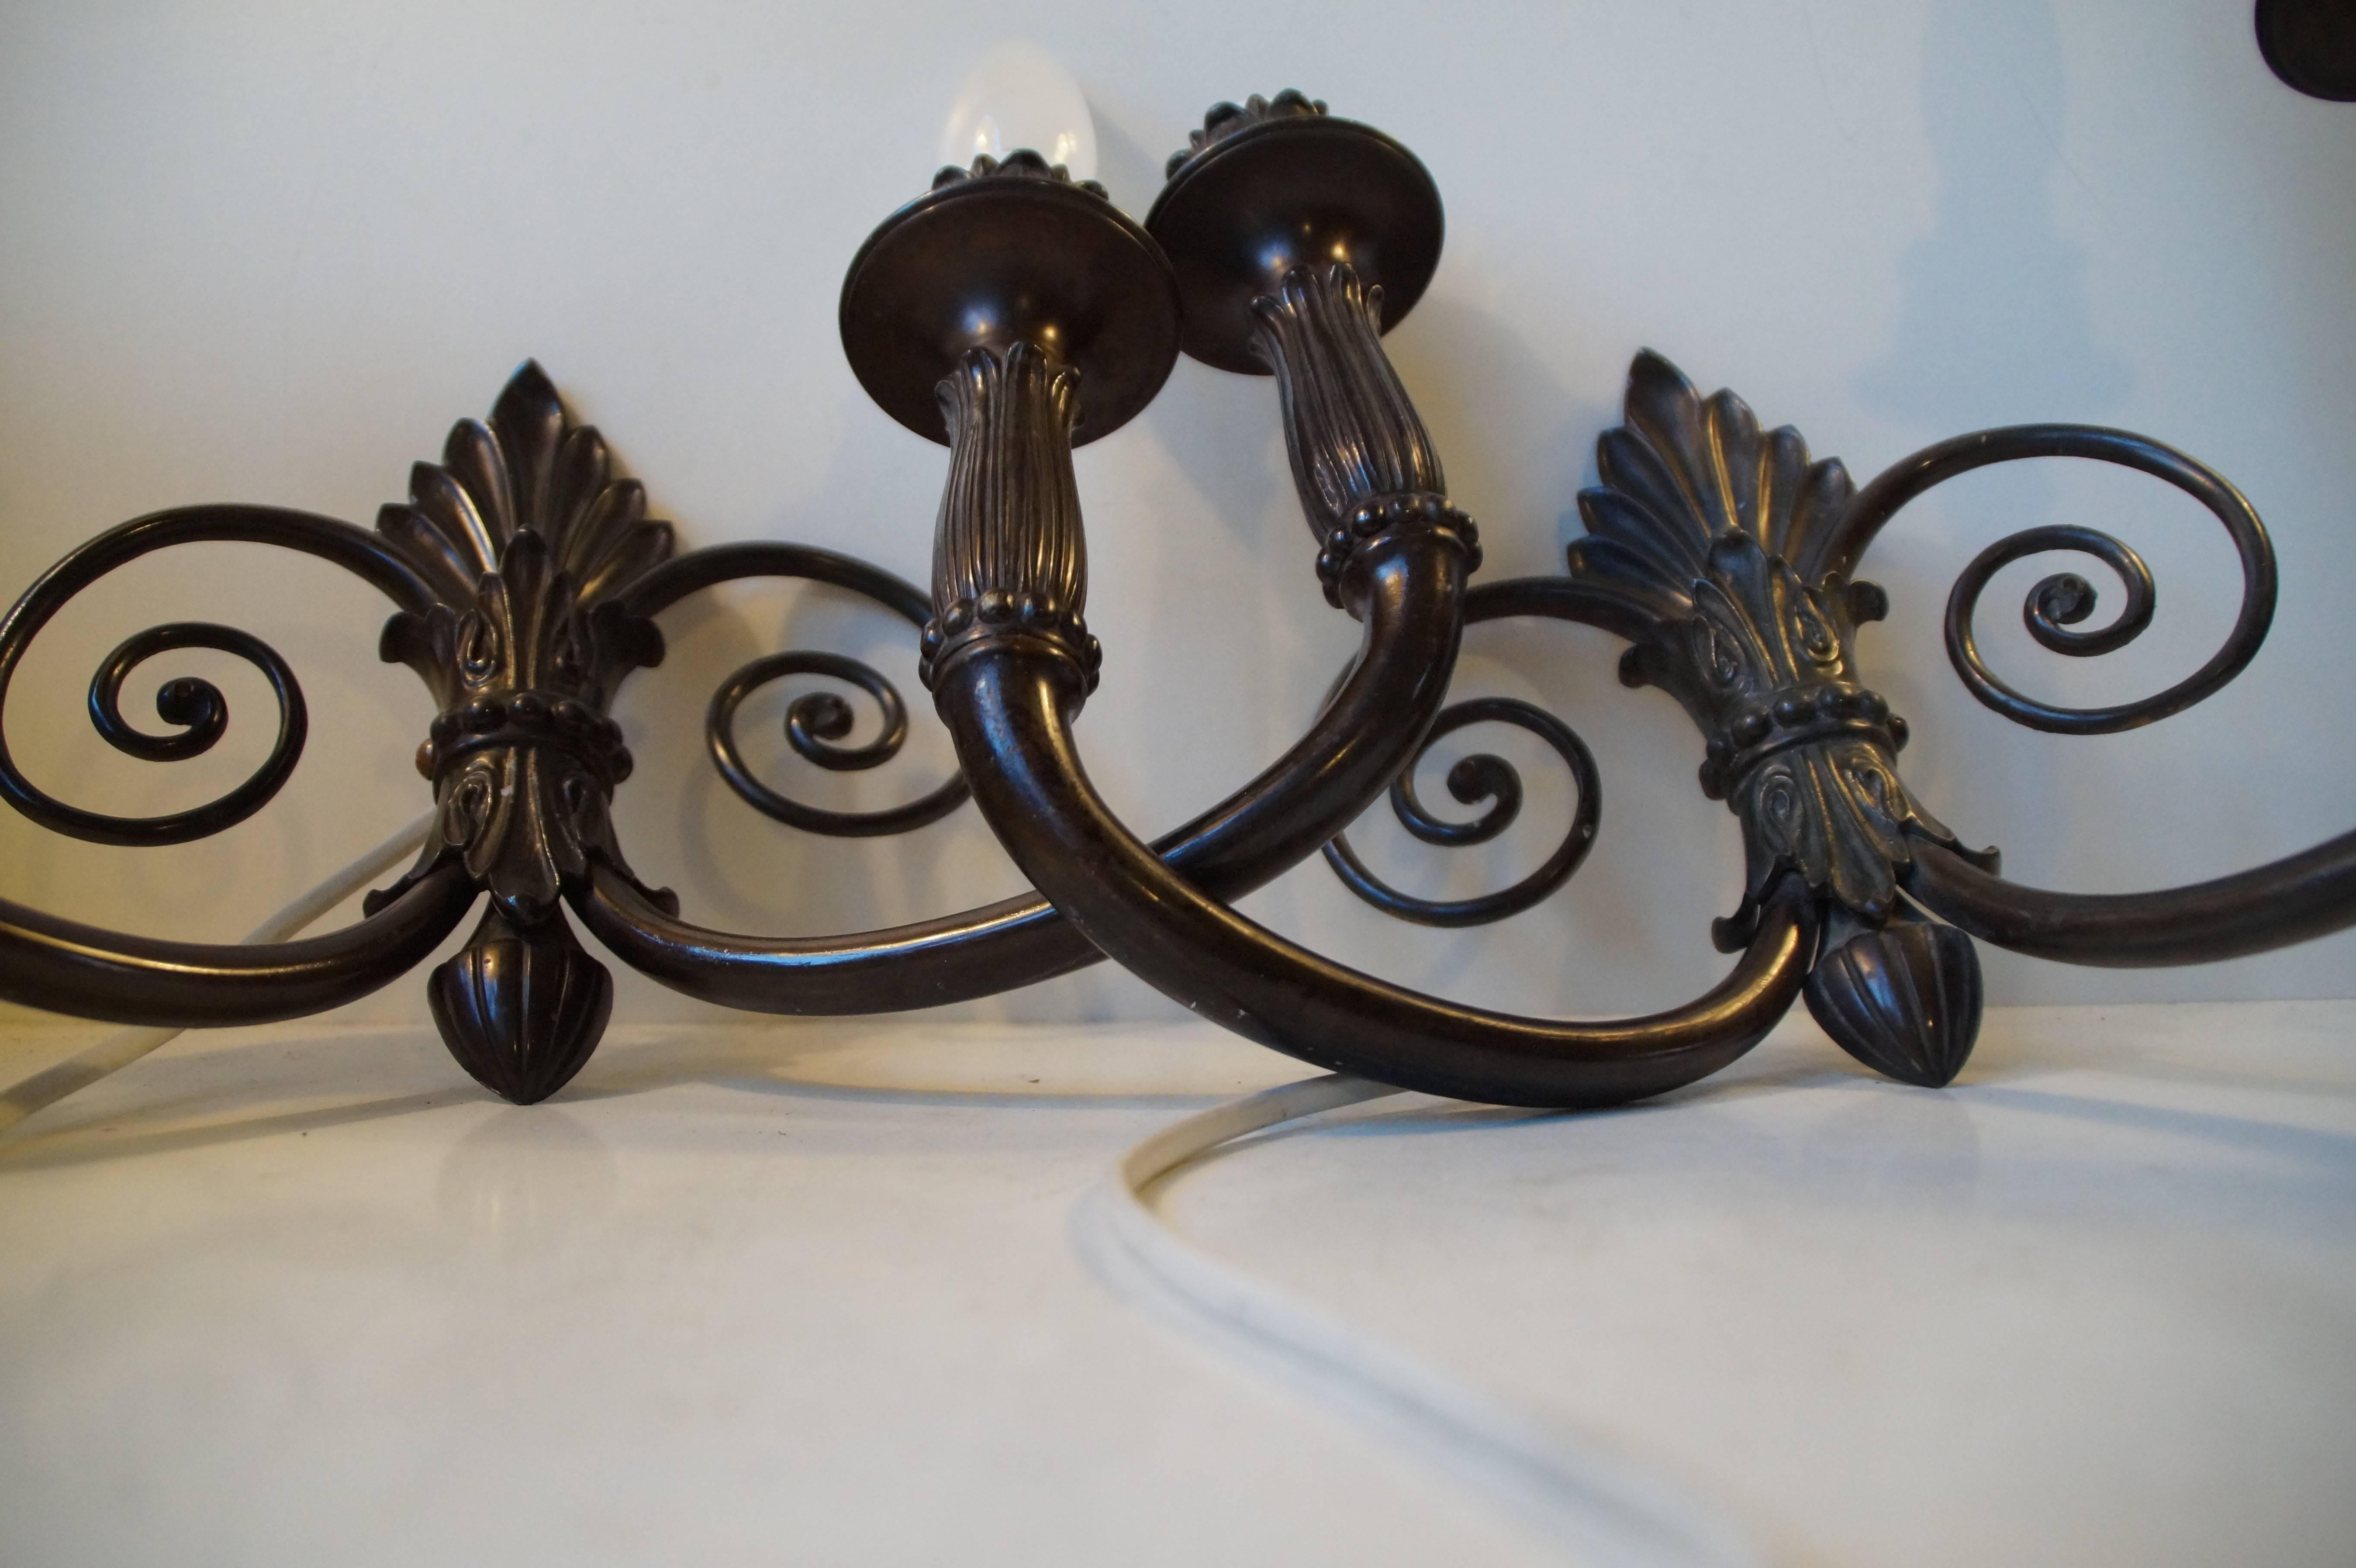 Exquisitely crafted pair of French two-armed sconces with superb detailing. Originally made as wall-candelabras. No alterations to the construction has been made so they are easily converted back to candelabras for candles. Measurements: H 8.5